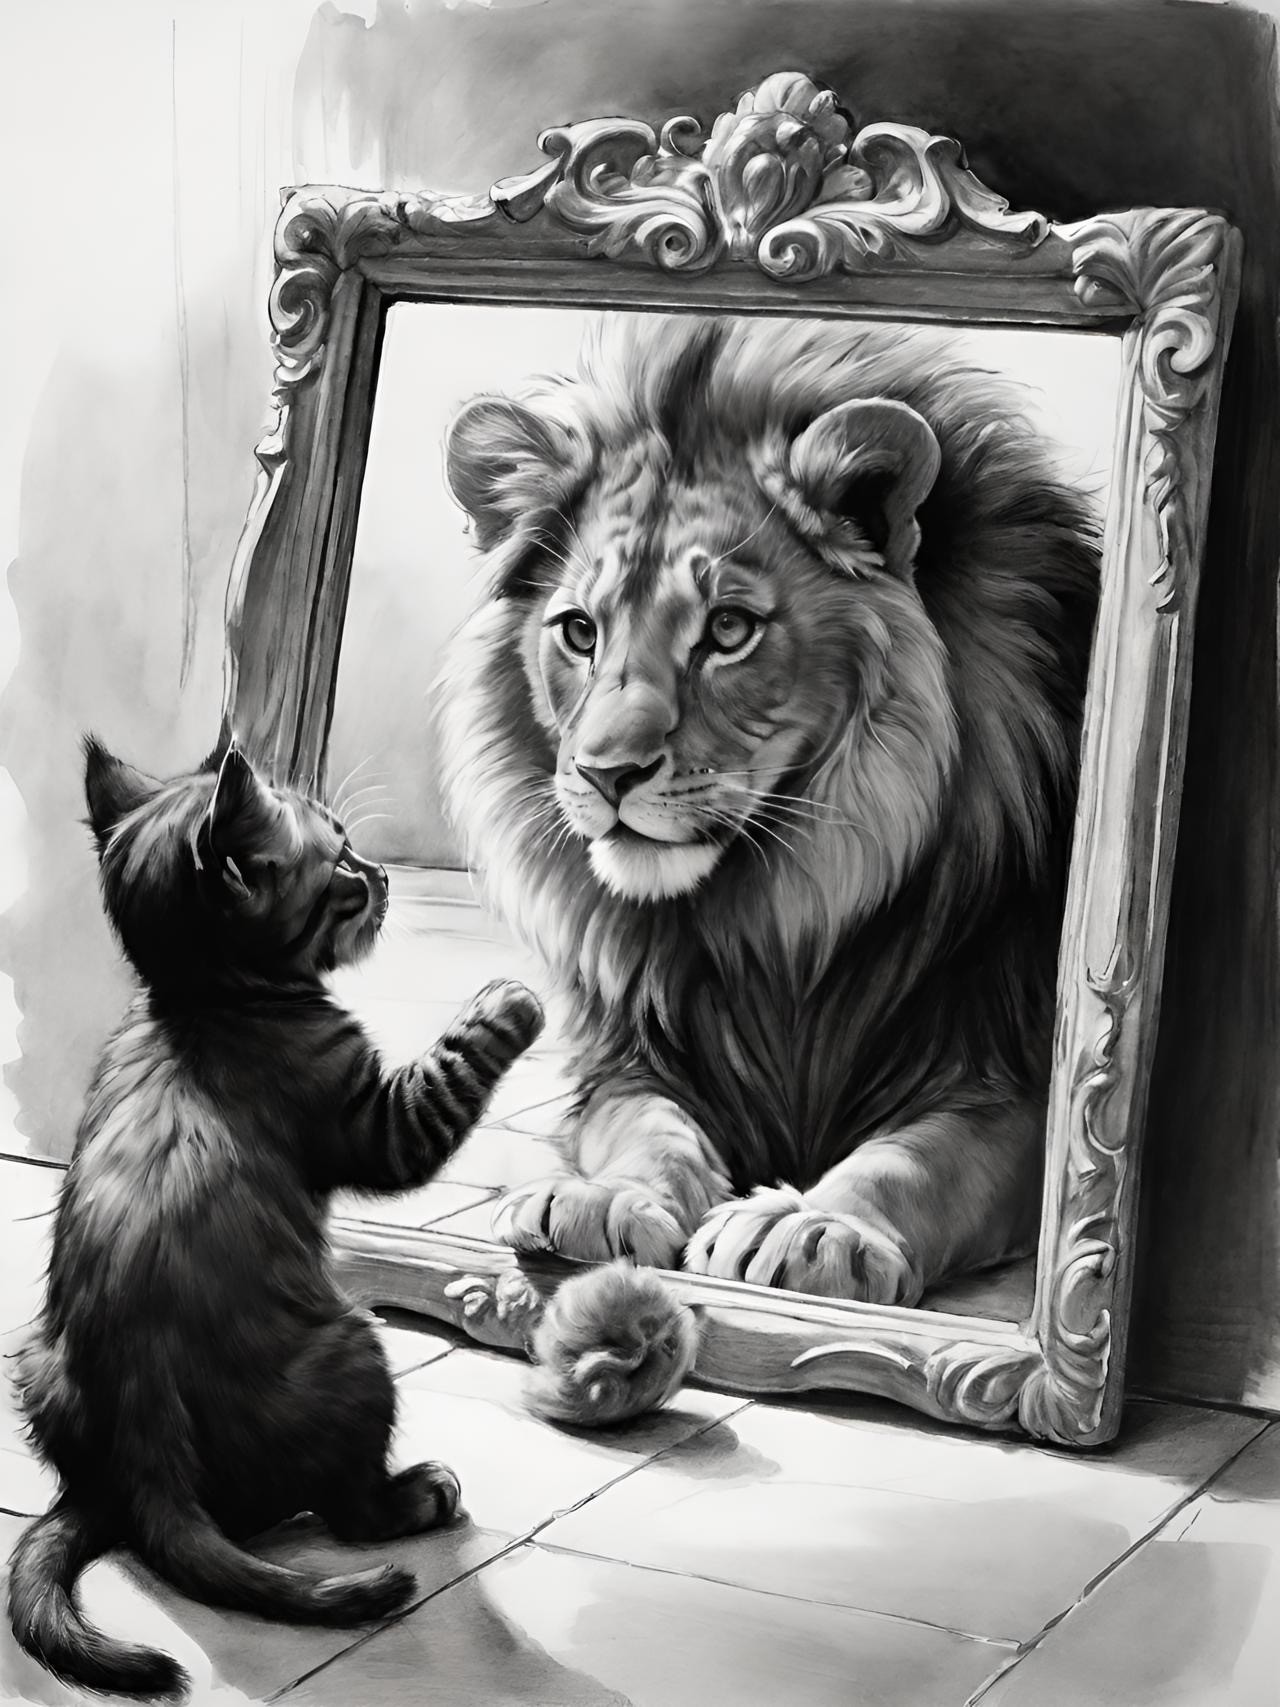 kitten looking at lion in a mirror